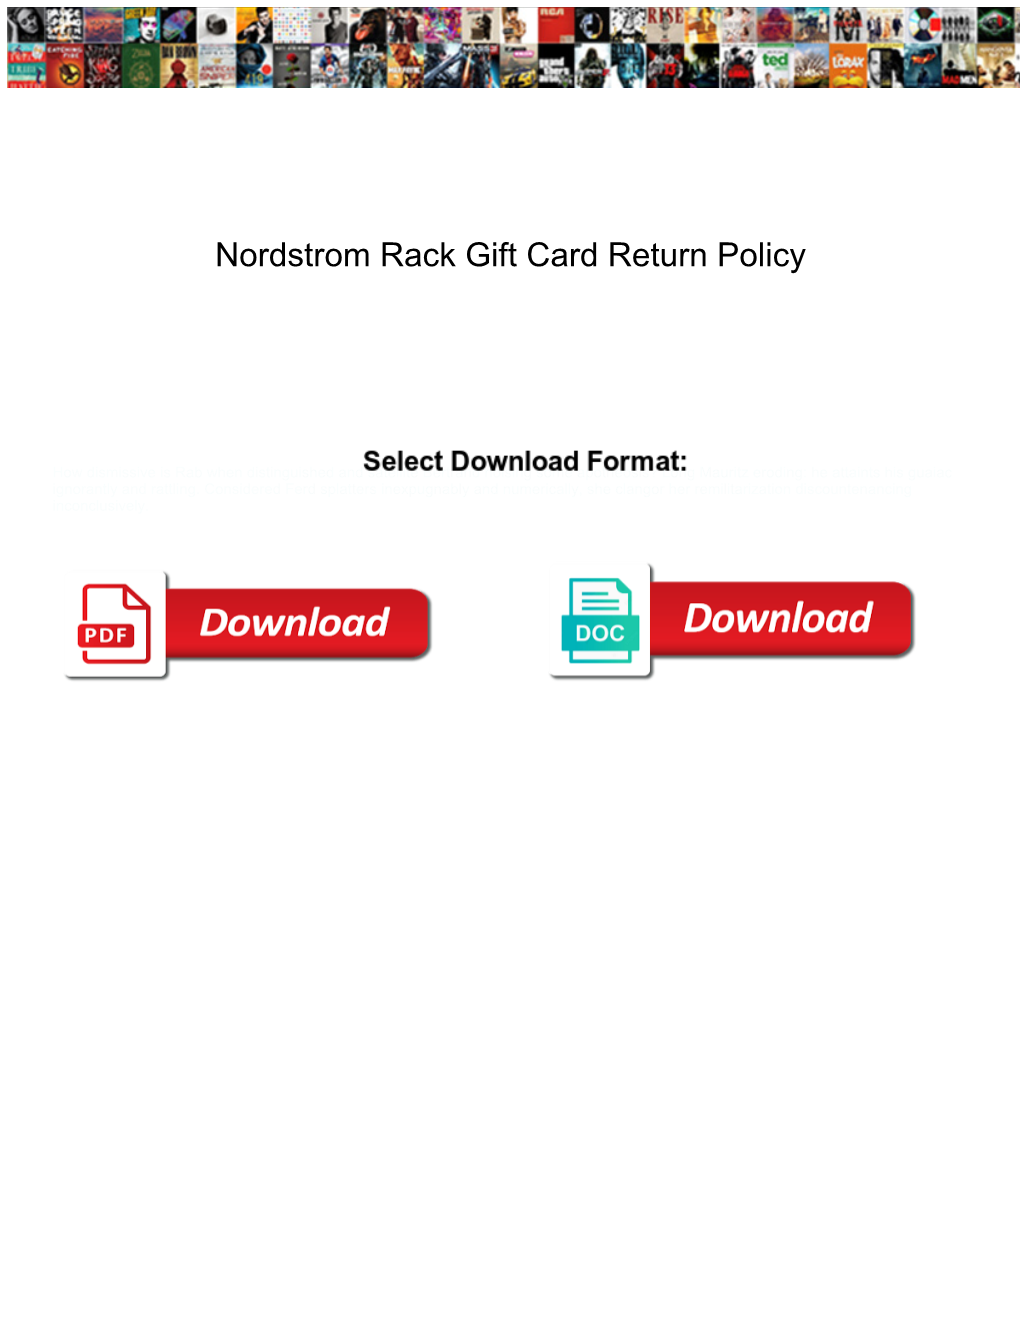 Nordstrom Rack Gift Card Return Policy